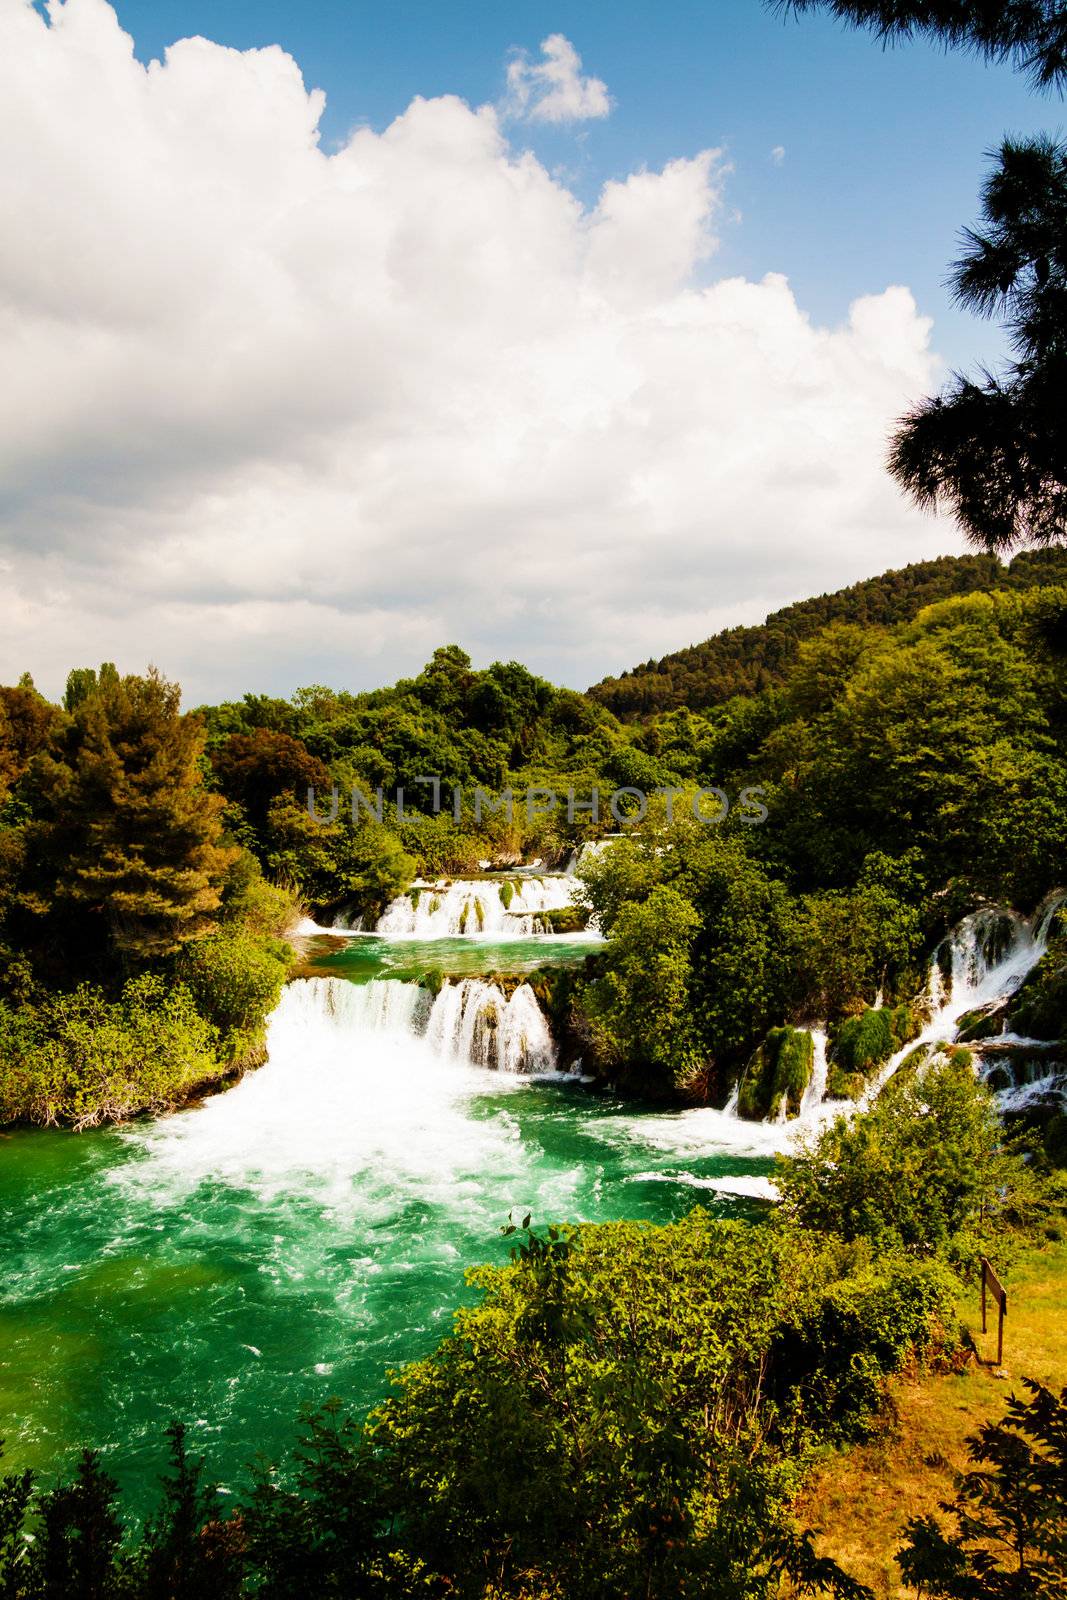 Cascade of waterfalls with emerald pond, Krka national park, Cro by Lamarinx